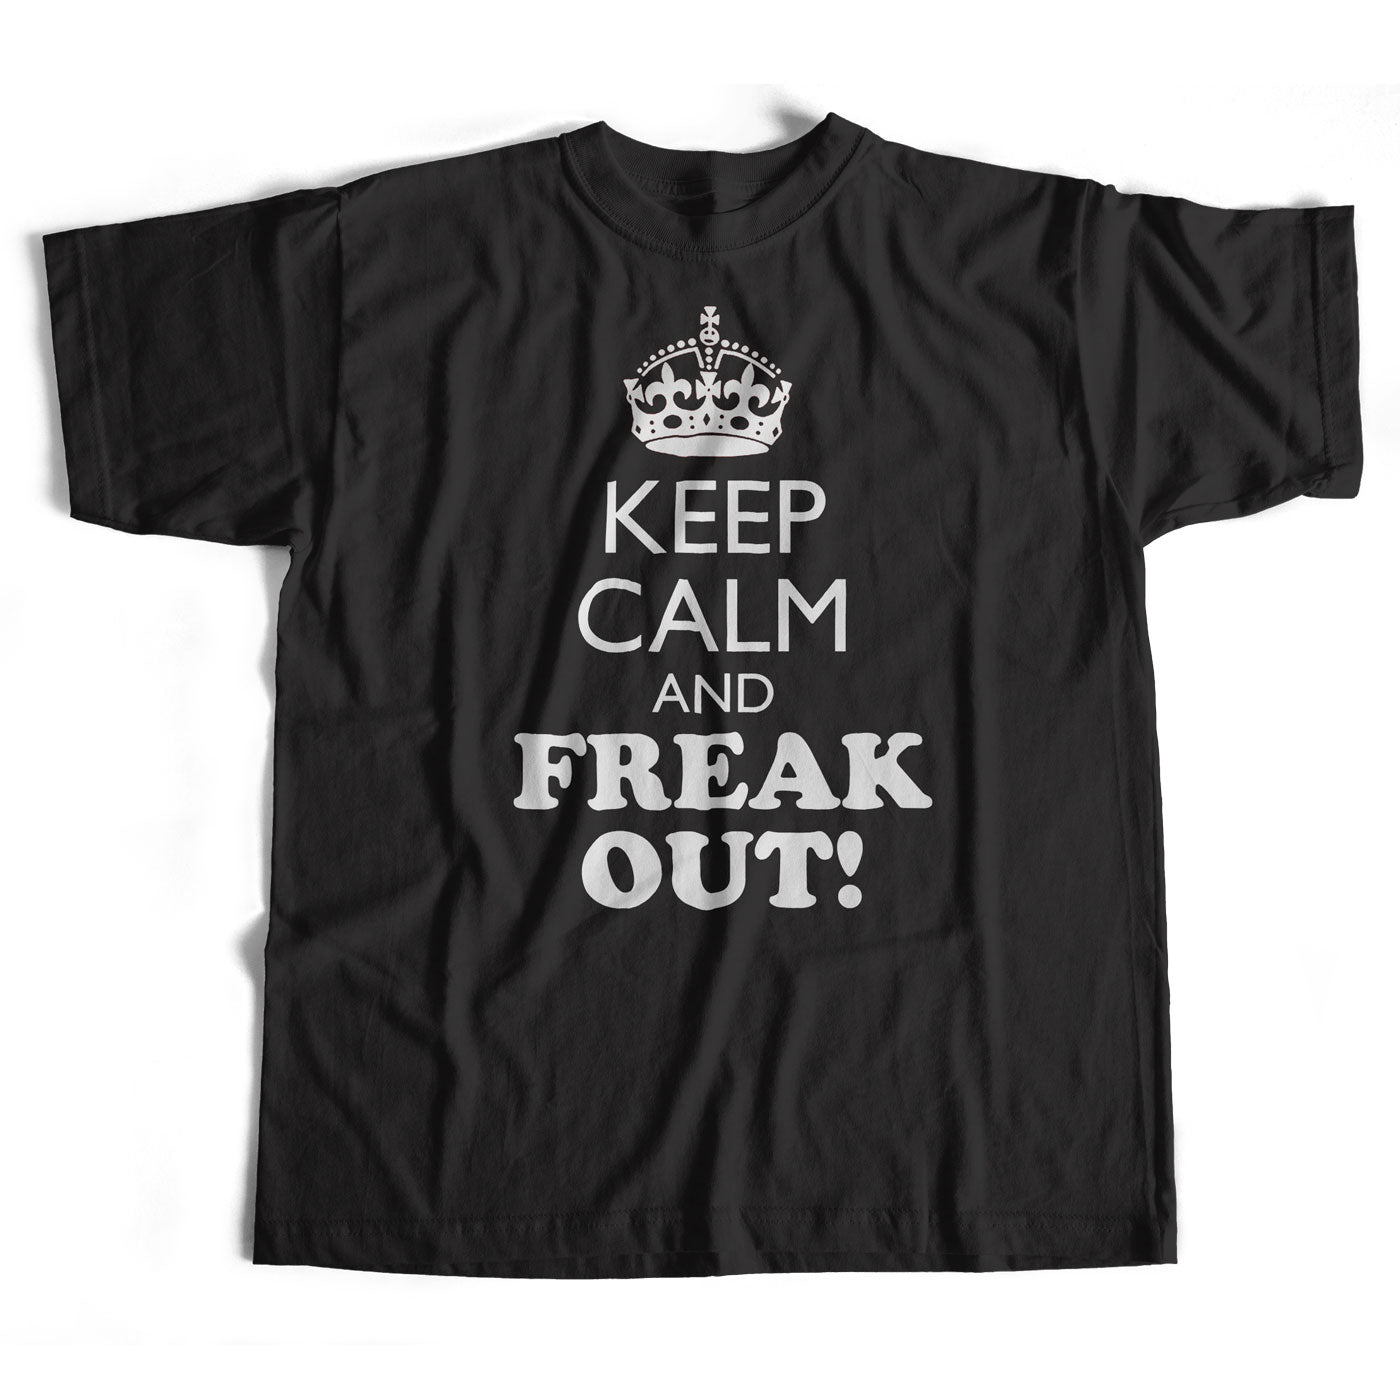 Inspired by Frank Zappa T Shirt - Keep Calm And Freak Out! Poster